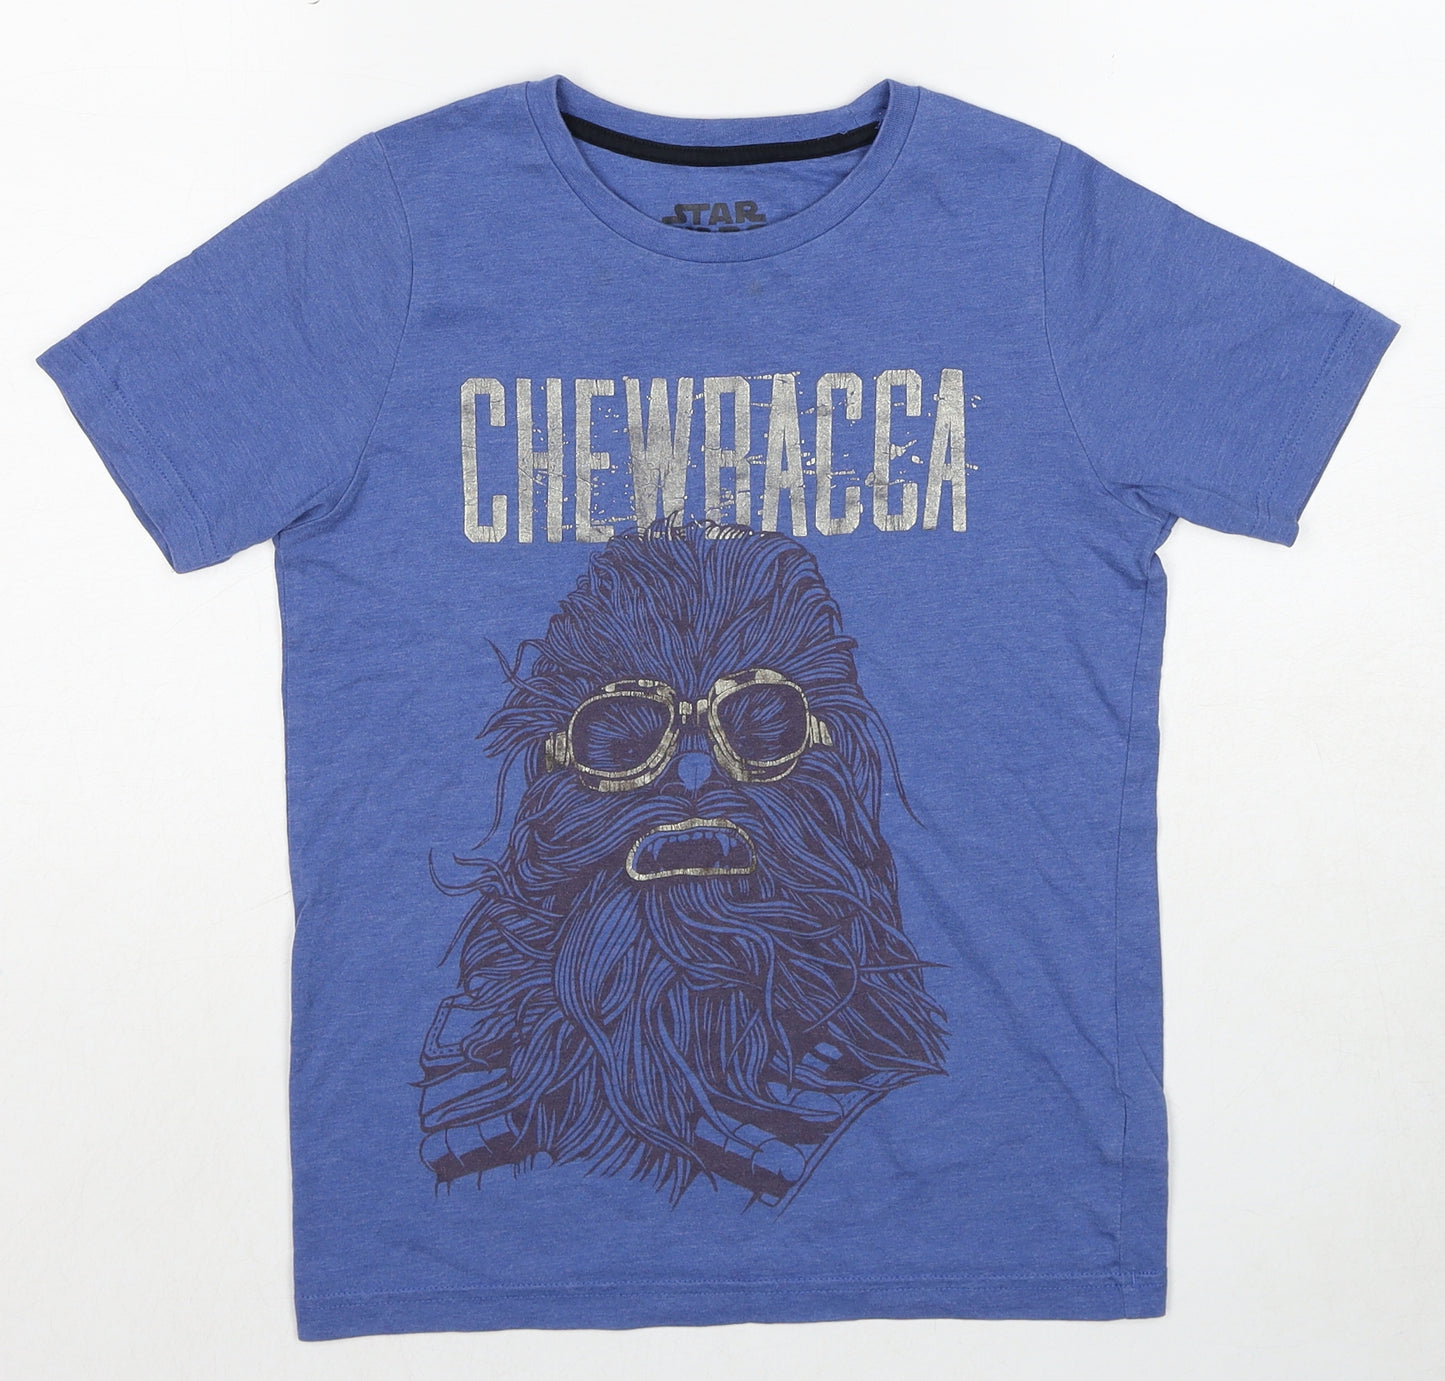 Star Wars Boys Blue Cotton Basic T-Shirt Size 9-10 Years Round Neck Pullover - Chewbacca